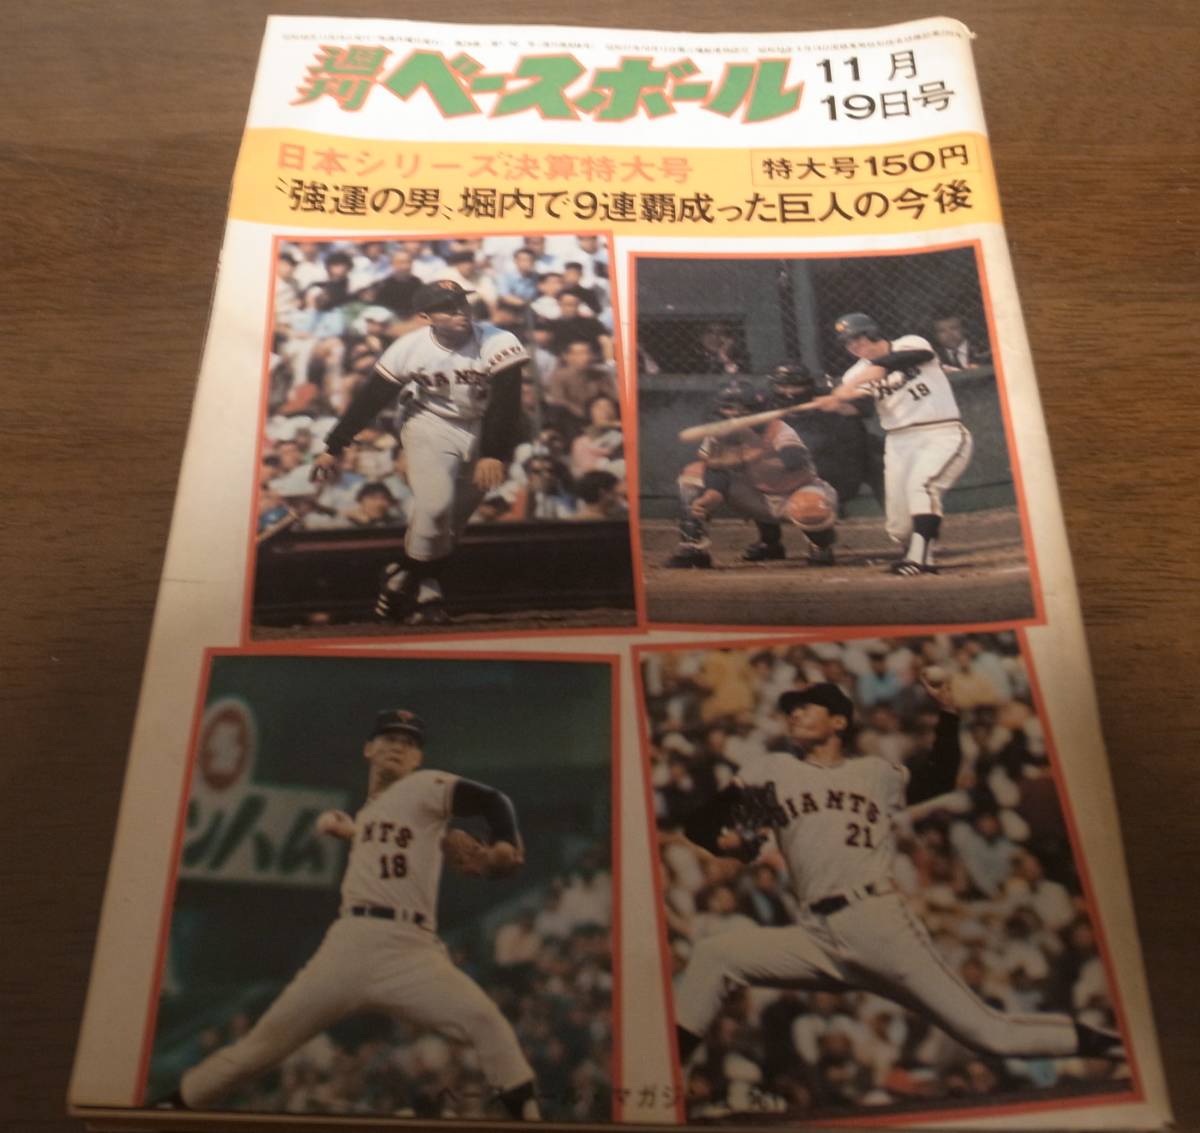  Showa era 48 year 11/19 weekly Baseball /. person - southern sea Japan series settlement of accounts extra-large number /. person V9/. inside . Hara /.../ river on ../..../. summer ./ Mihara ./ luck book@.